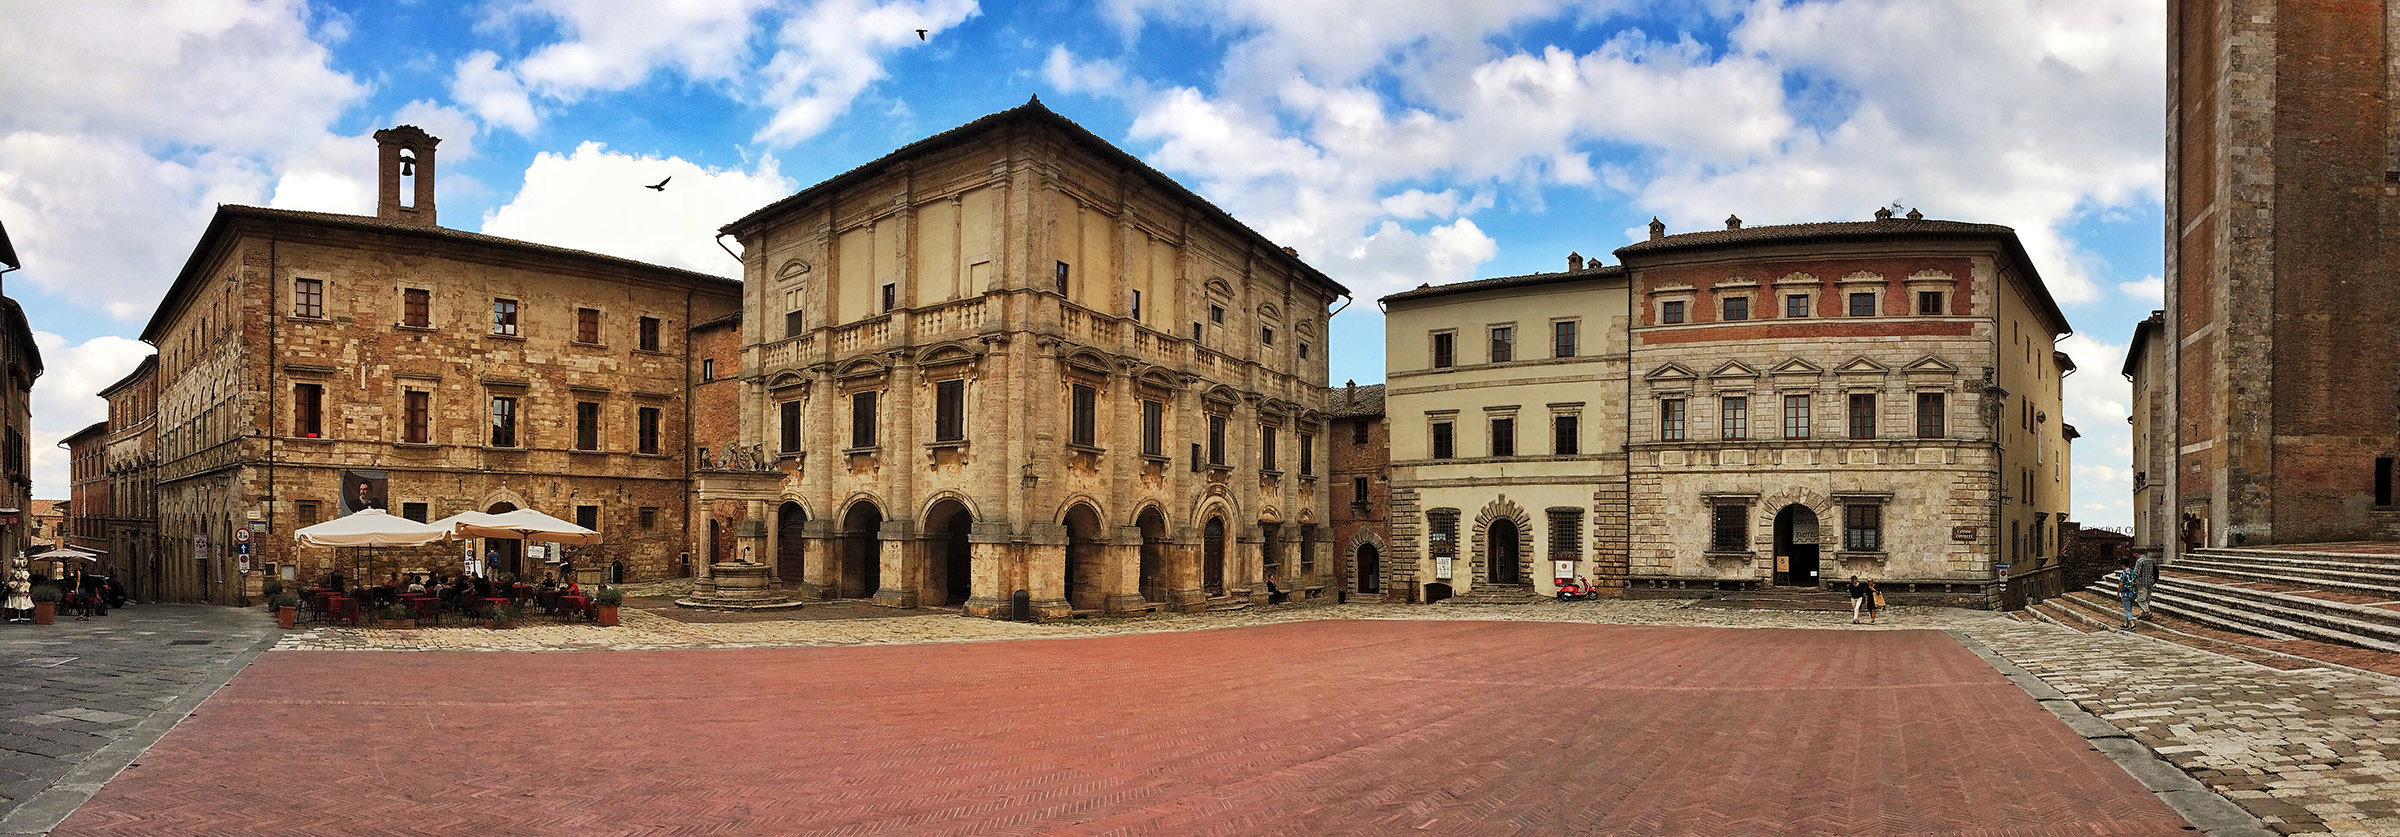 One of the main piazzas inside Montepulciano.  